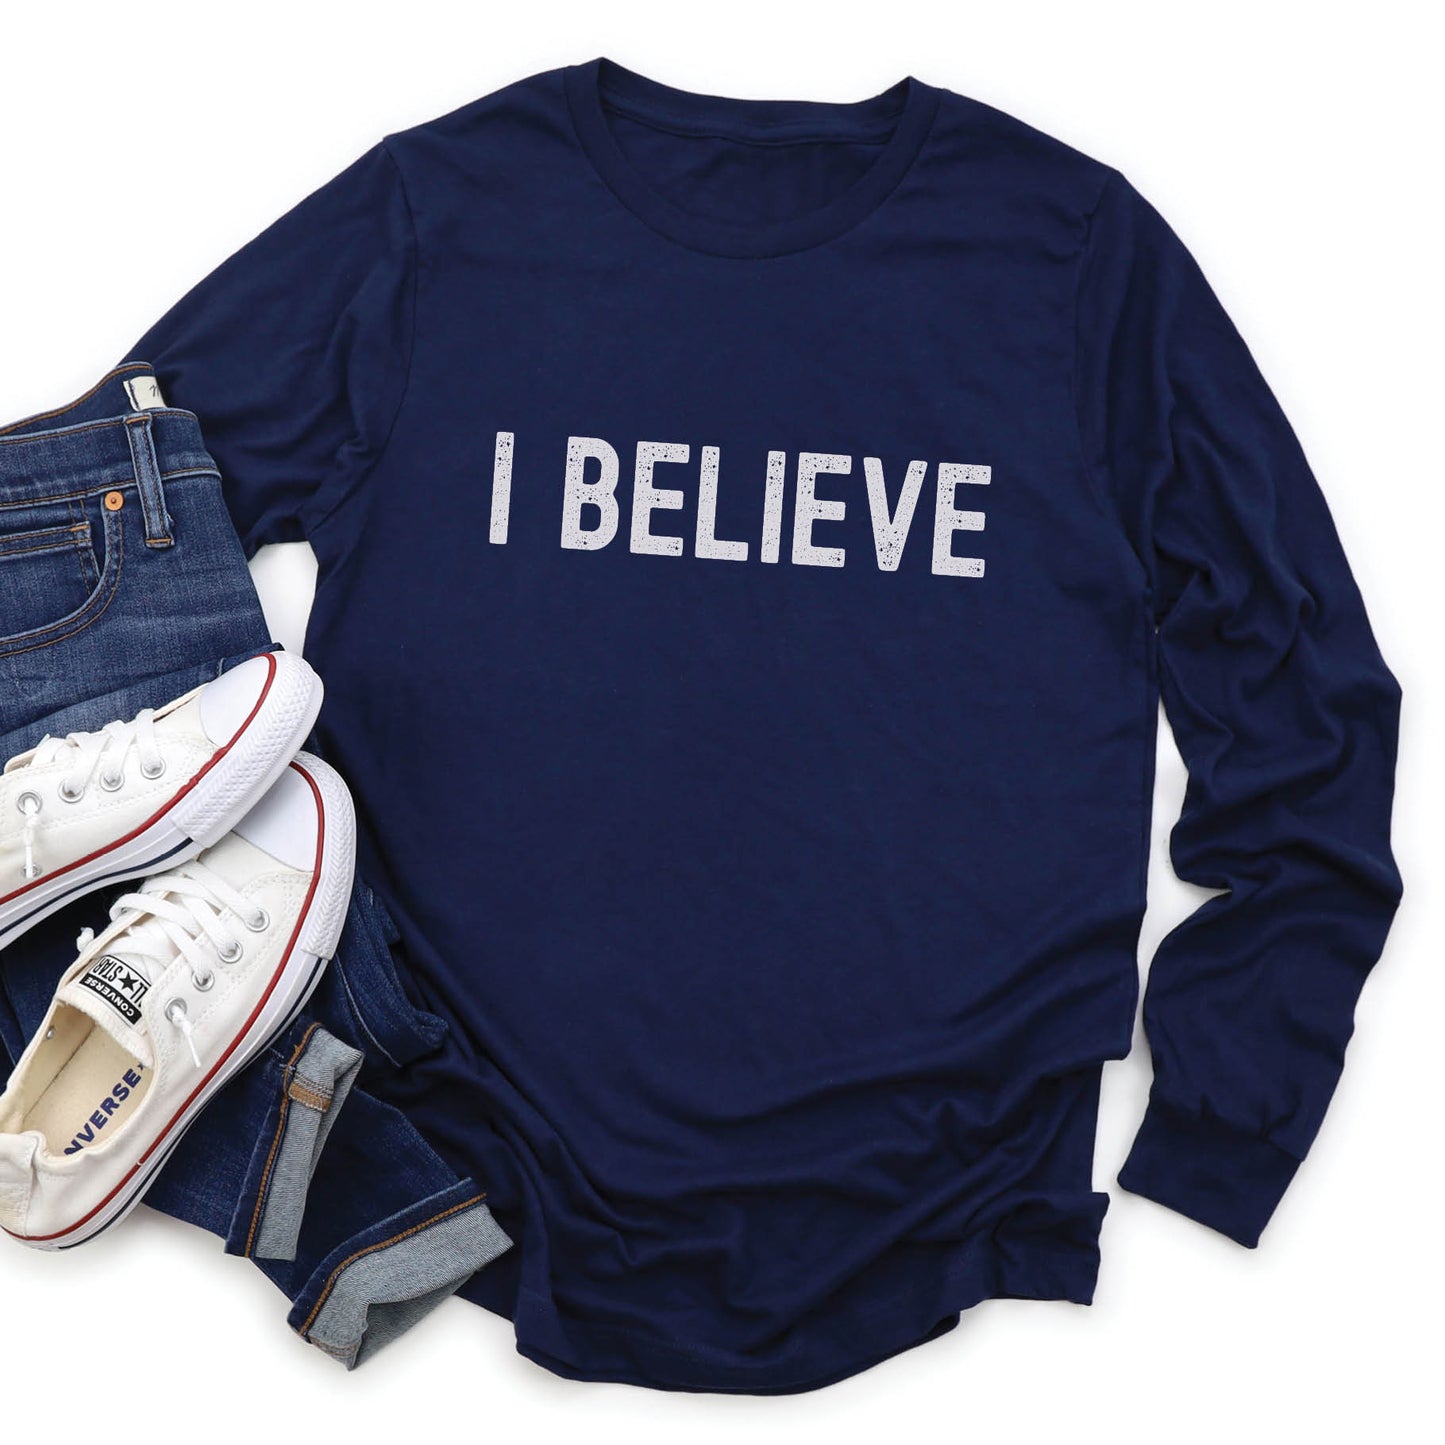 Navy blue cozy long sleeve t-shirt with a bold faith-based statement "I BELIEVE" distressed typography design printed in white, created for Christian men and women Jesus believers